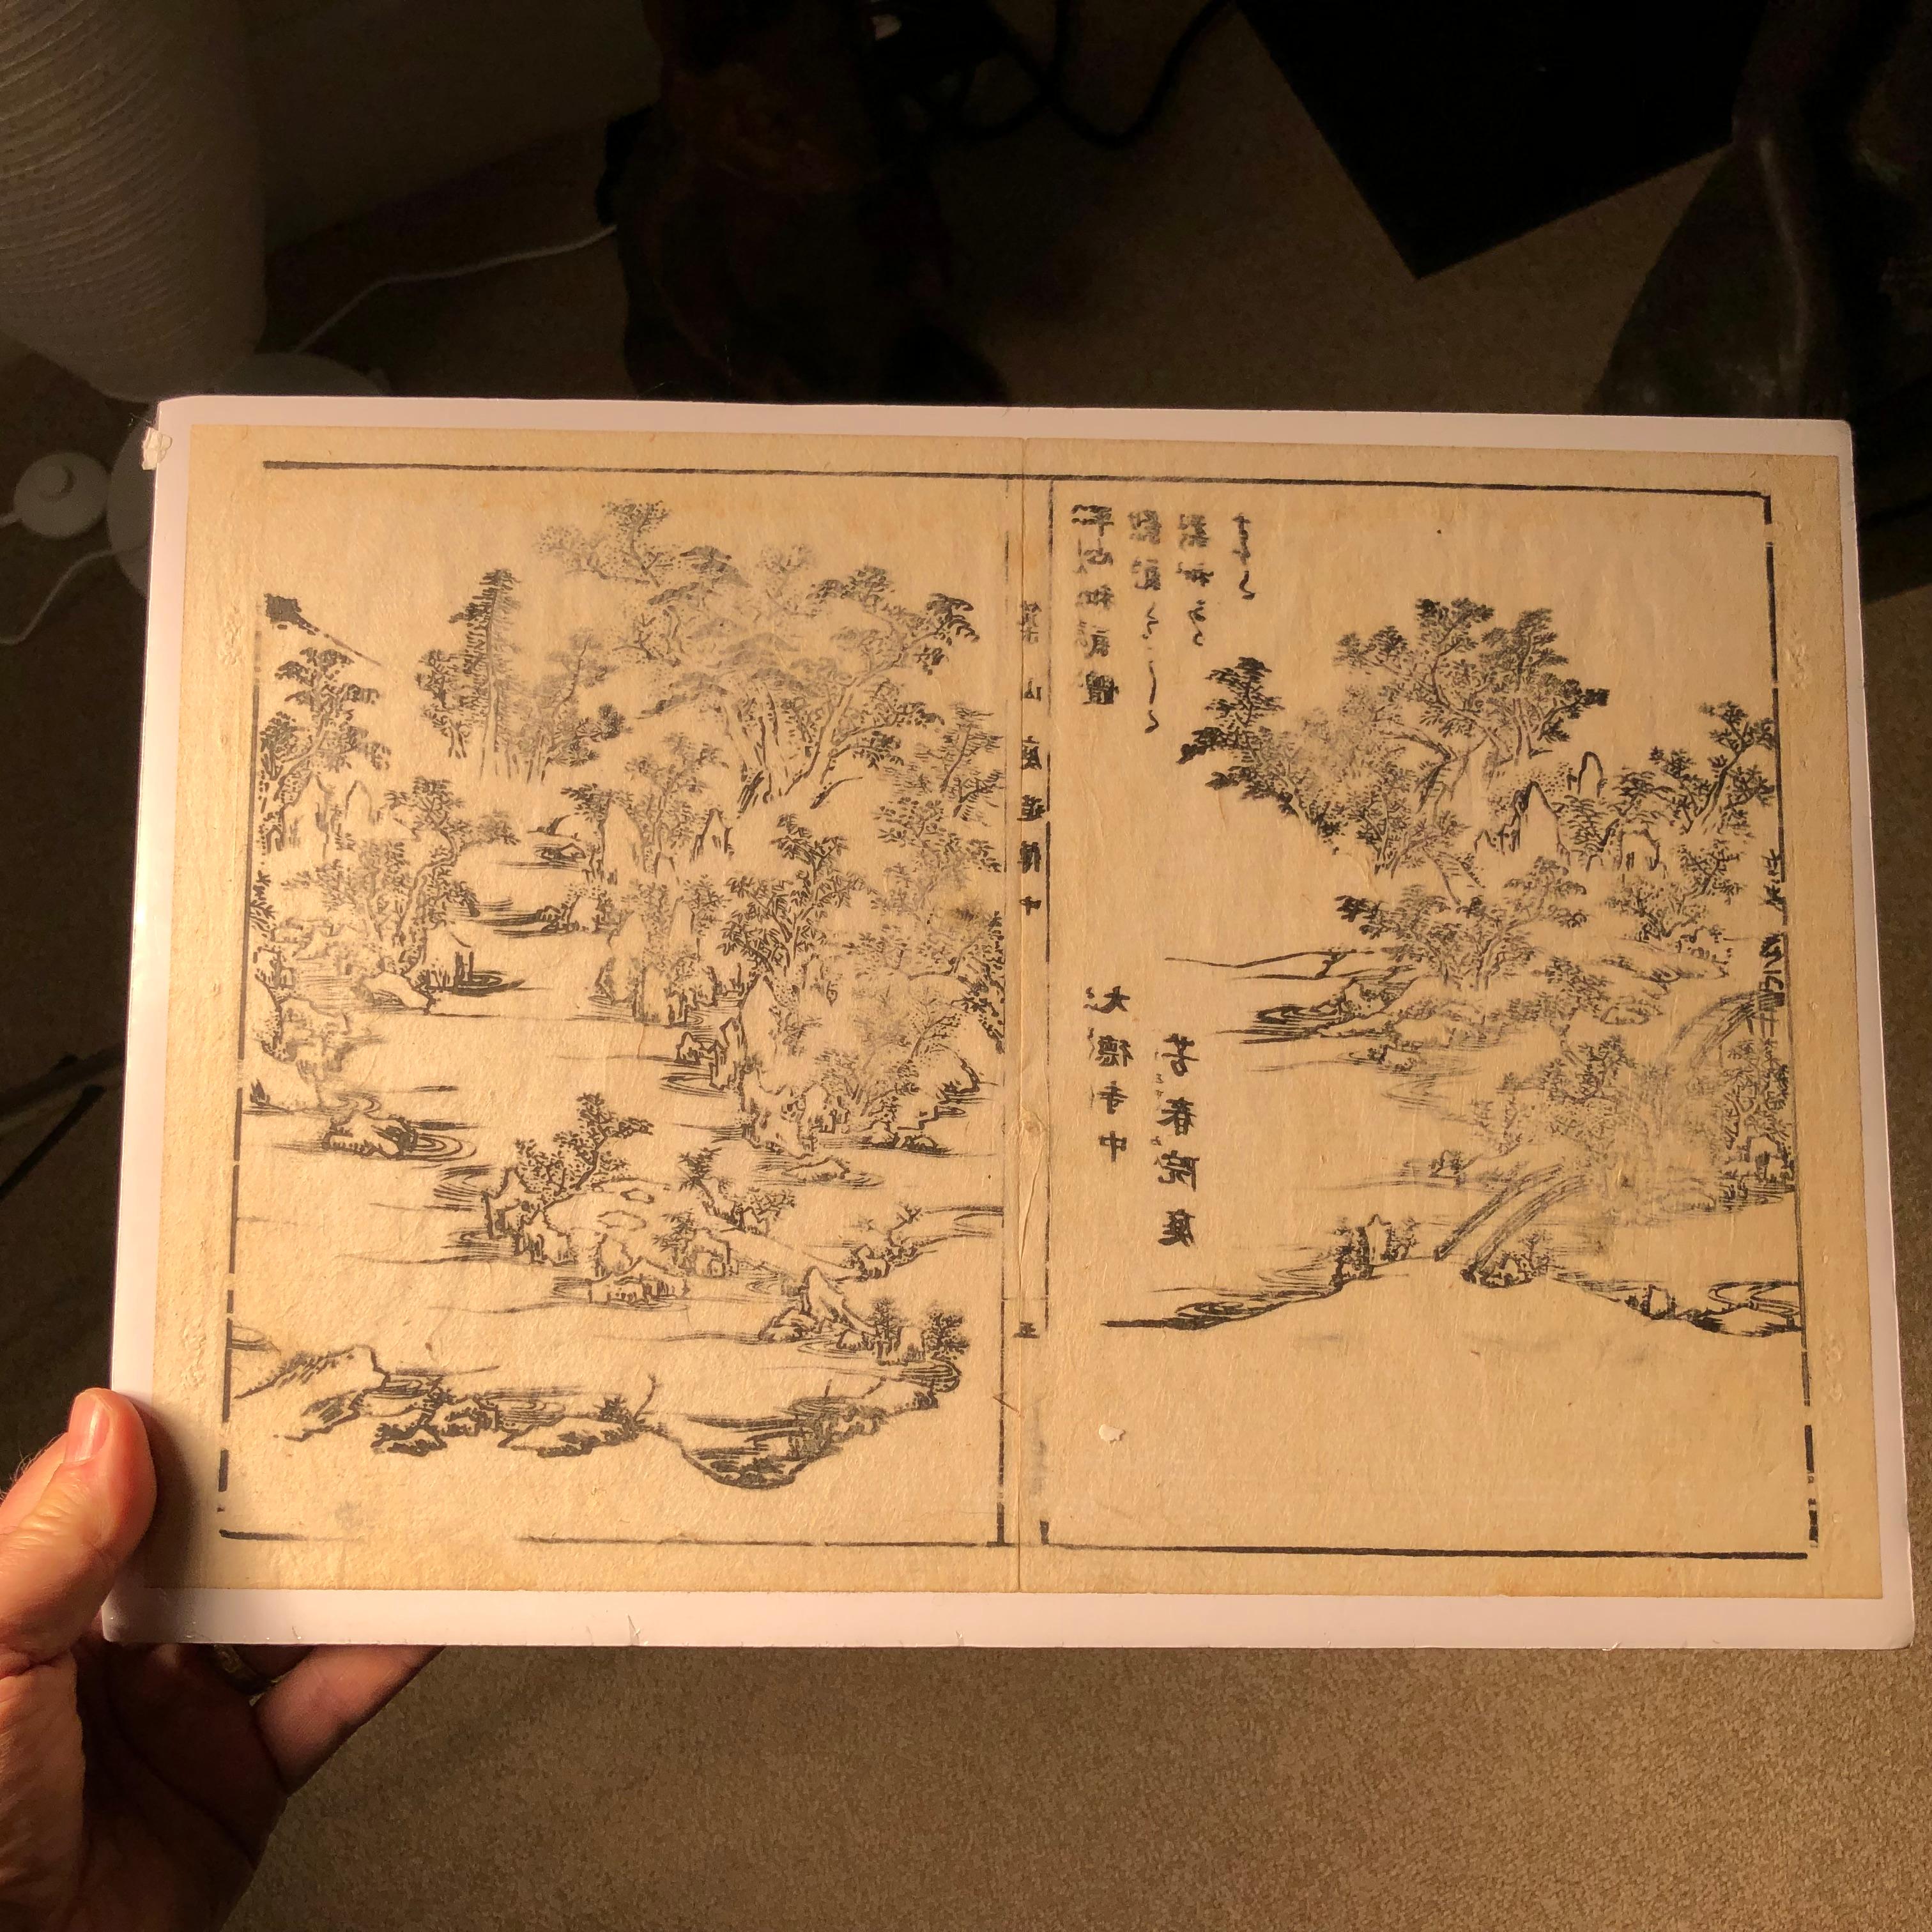 Japanese Four Old Kyoto Garden Woodblock Prints 18th-19th Century, Frameable #1 4